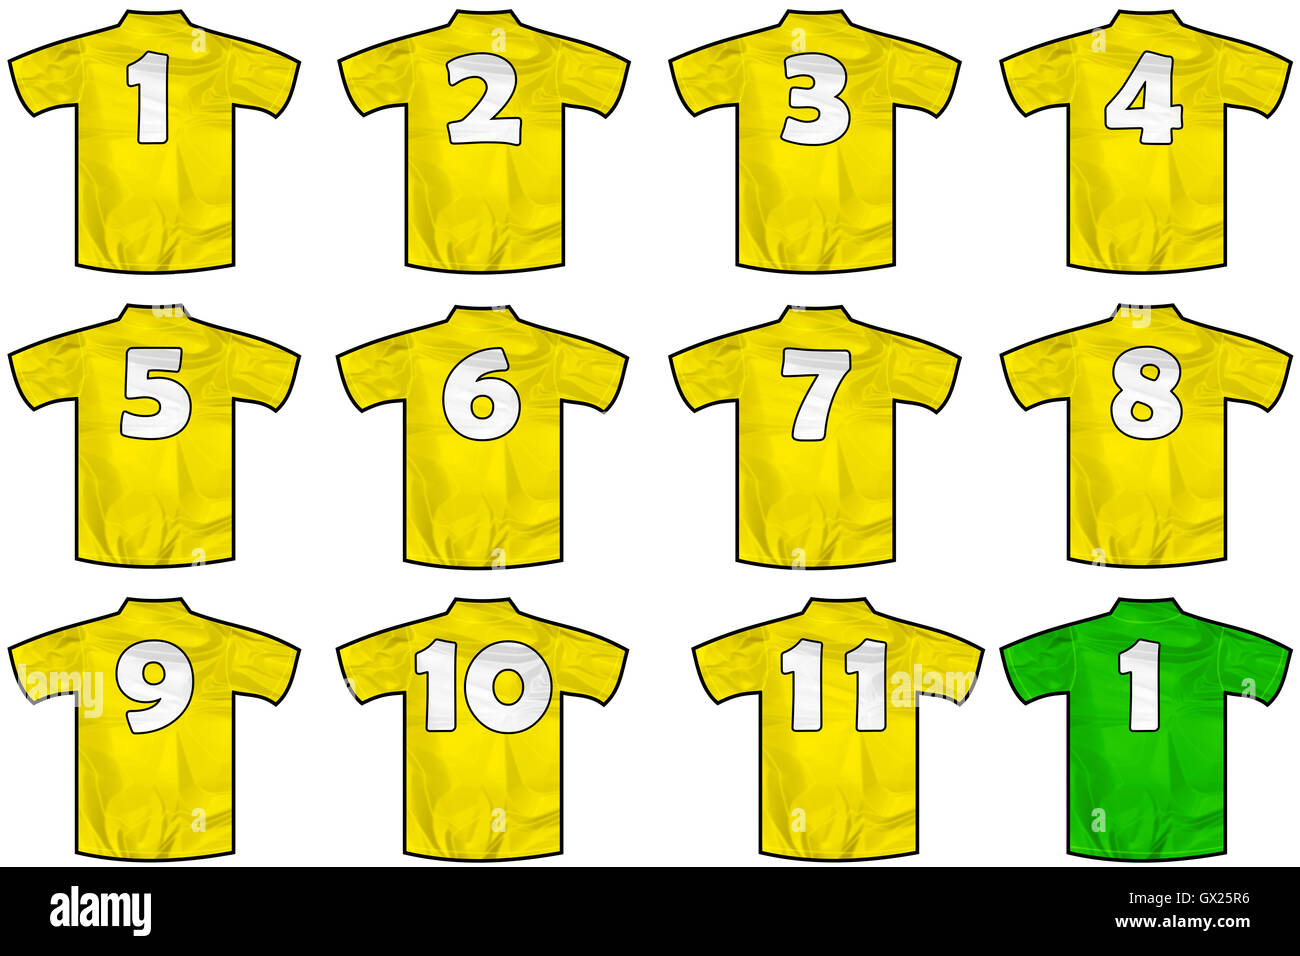 White Football Shirt Number 6 Template